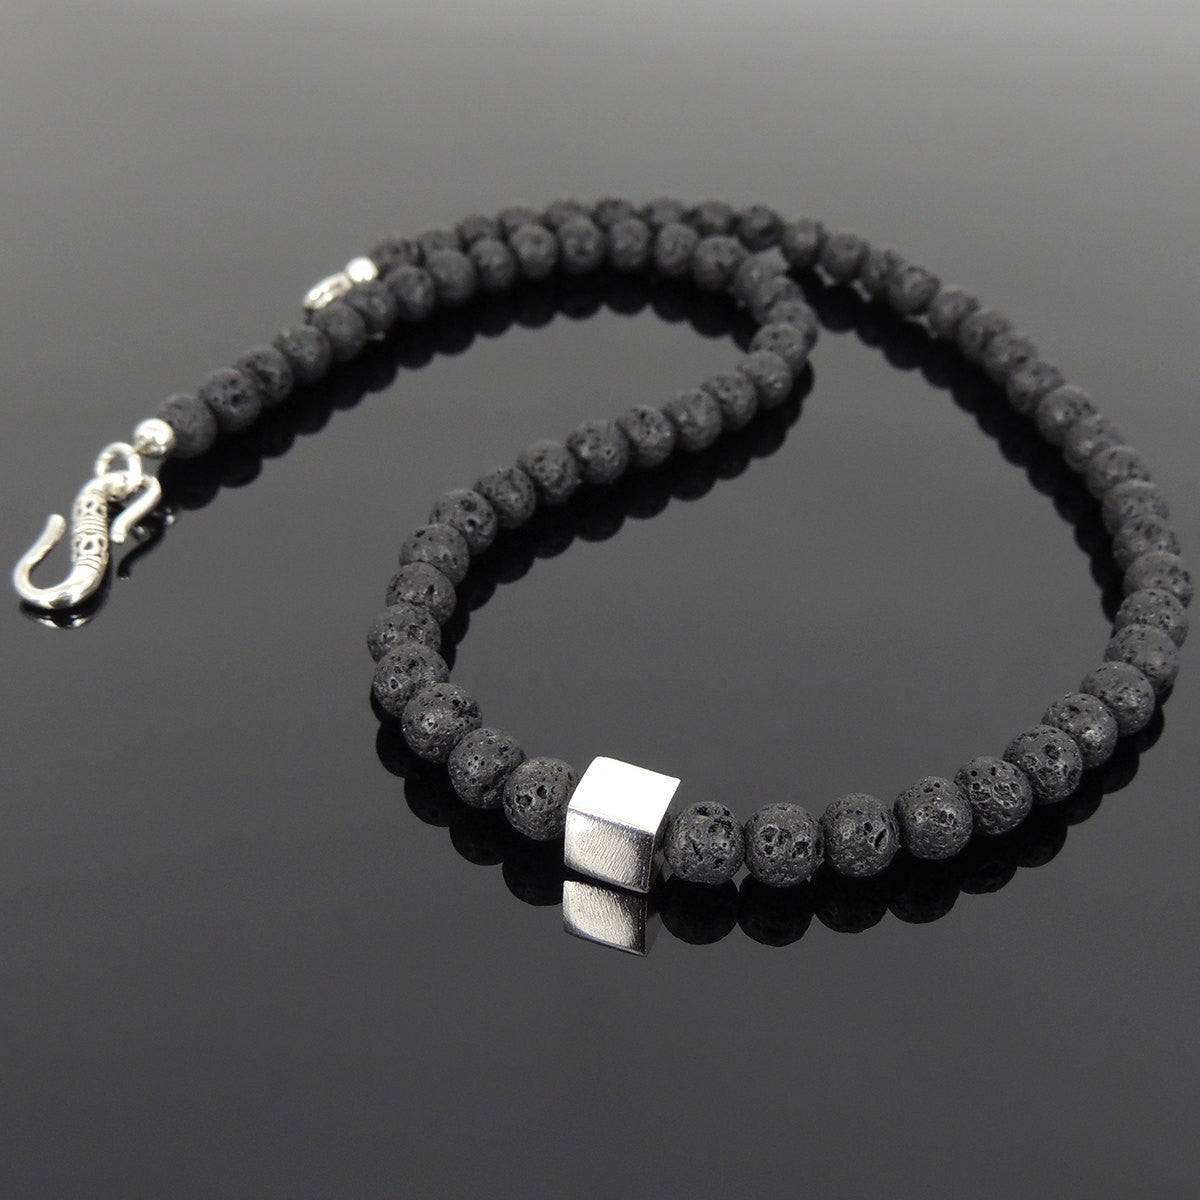 6mm Lava Rock Healing Stone Necklace with S925 Sterling Silver Cube Balance Bead & S-hook Clasp - Handmade by Gem & Silver NK098